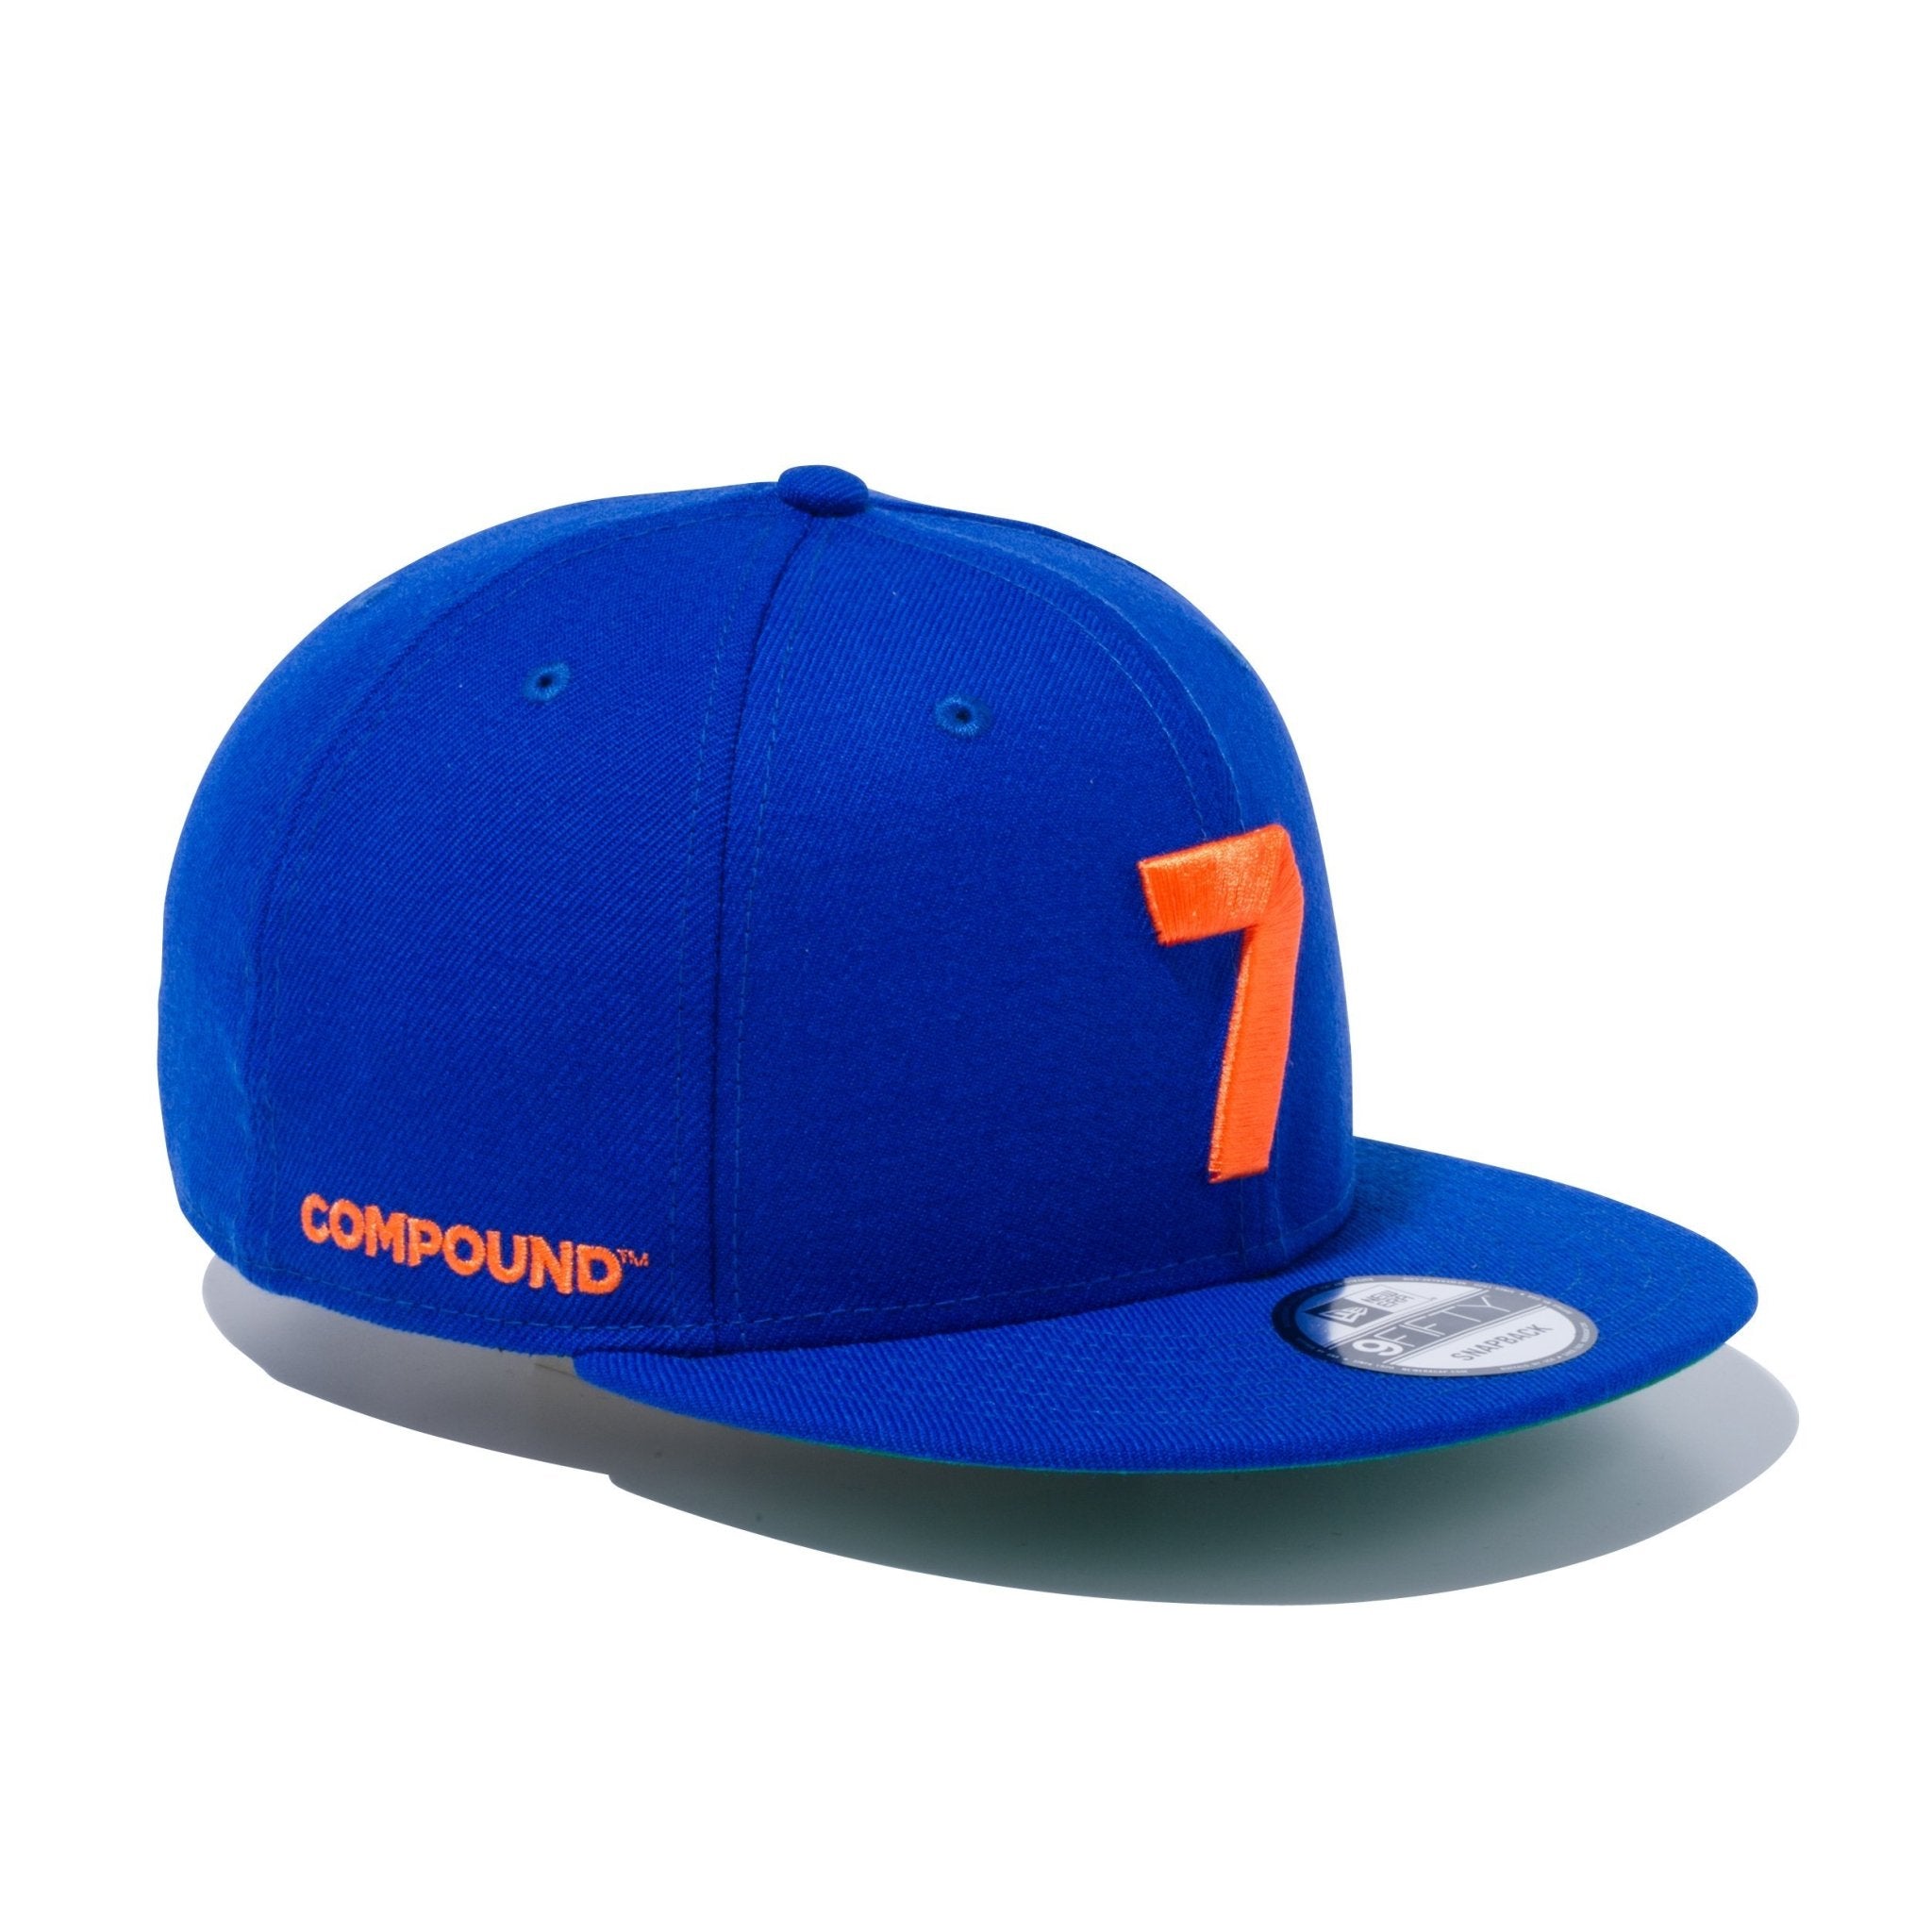 9FIFTY The COMPOUND 7 ブルー × オレンジ